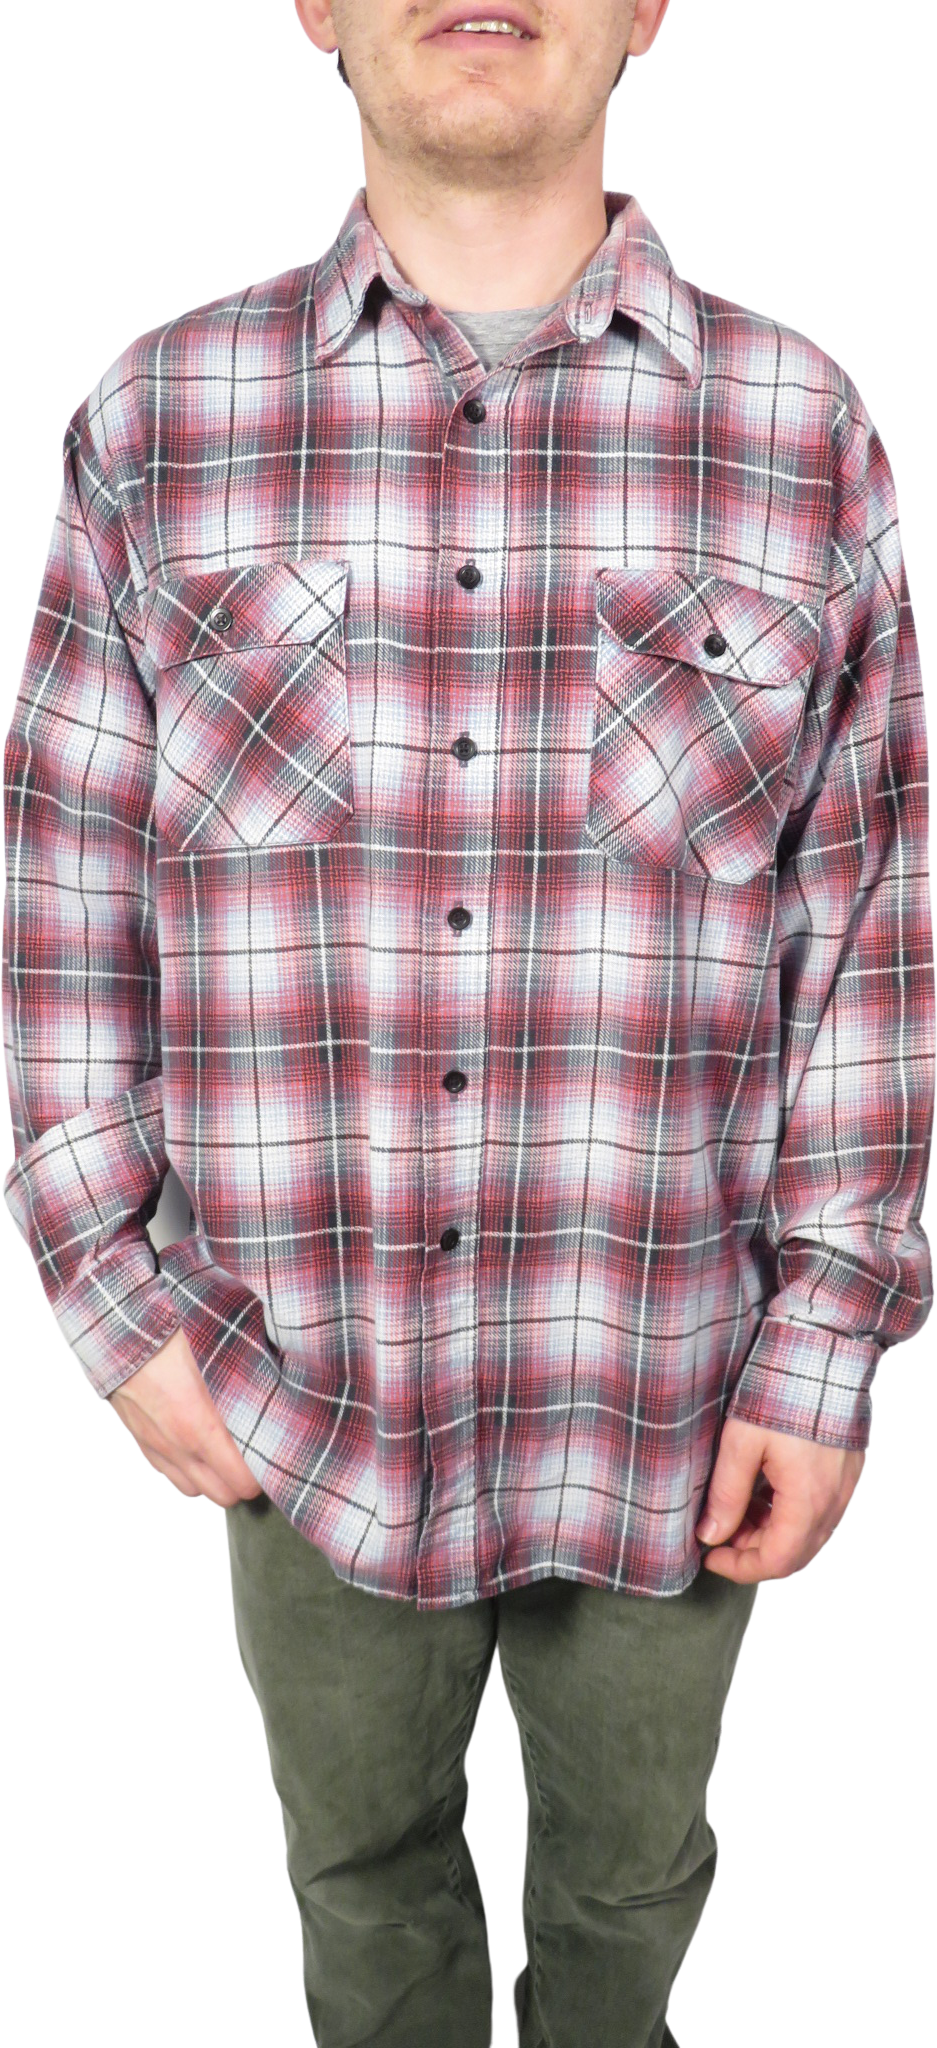 Retro 1990s Plaid Button Up Flannel Shirt With Front Pocket